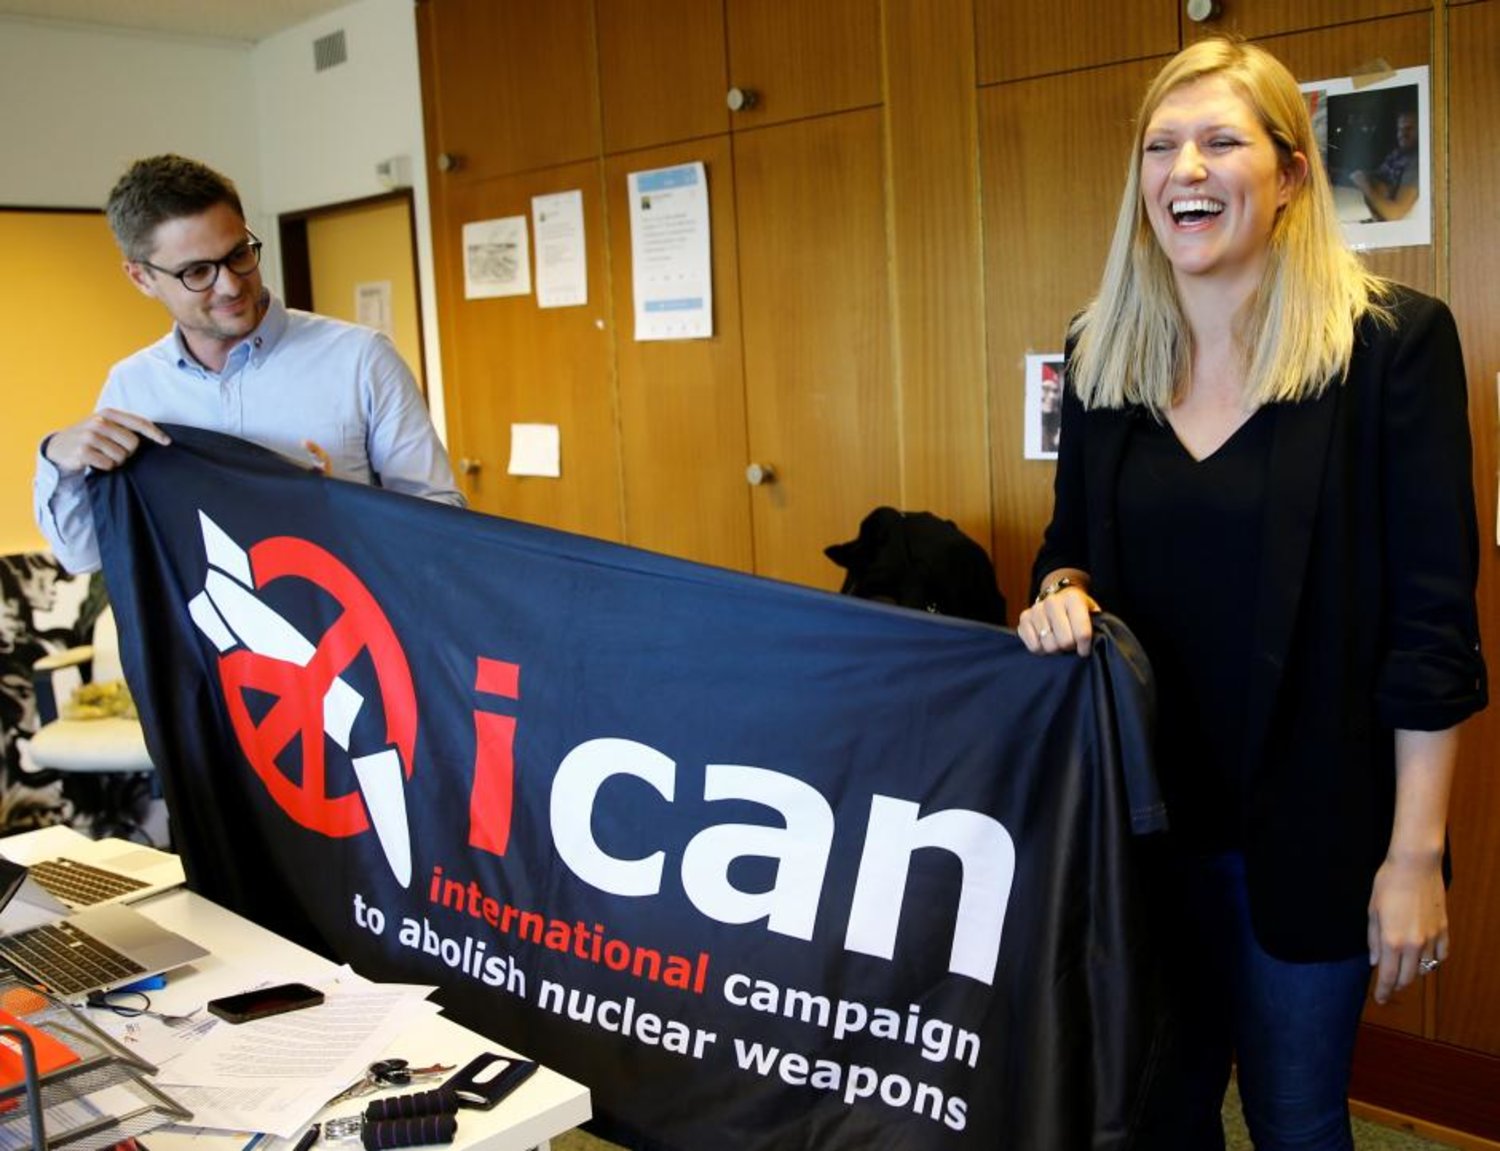 The International Campaign to Abolish Nuclear Weapons (ICAN) was awarded the Nobel Prize for Peace. (Reuters)